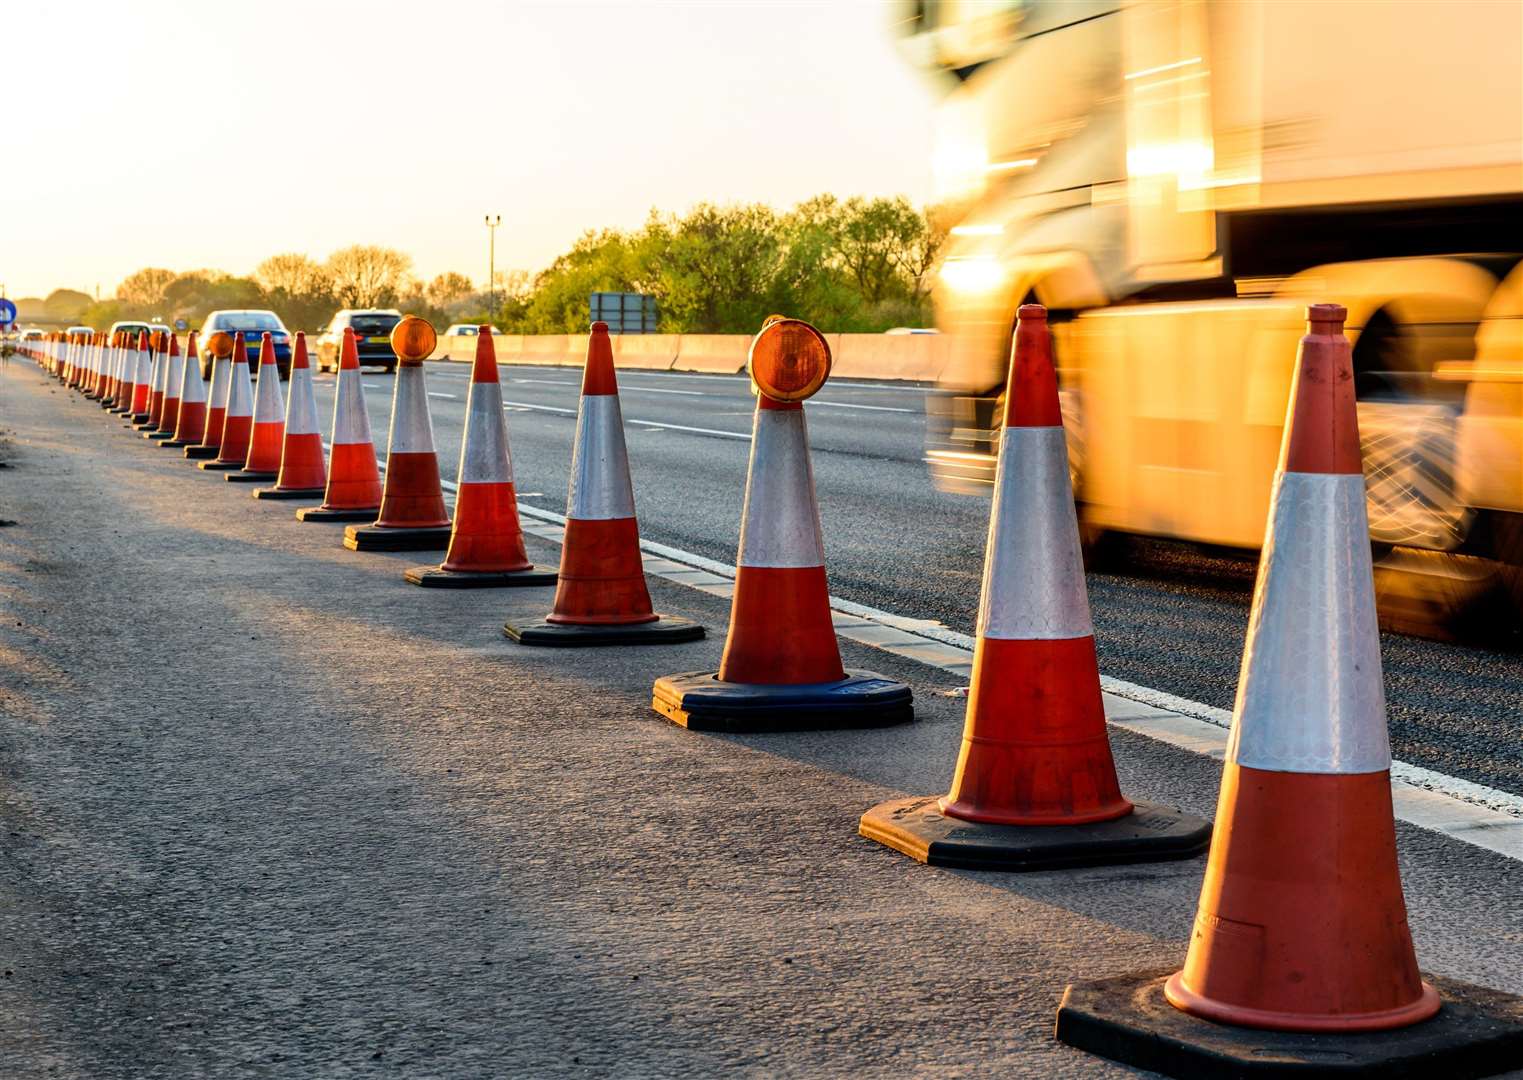 Motorists should be aware of the ongoing roadworks across the county